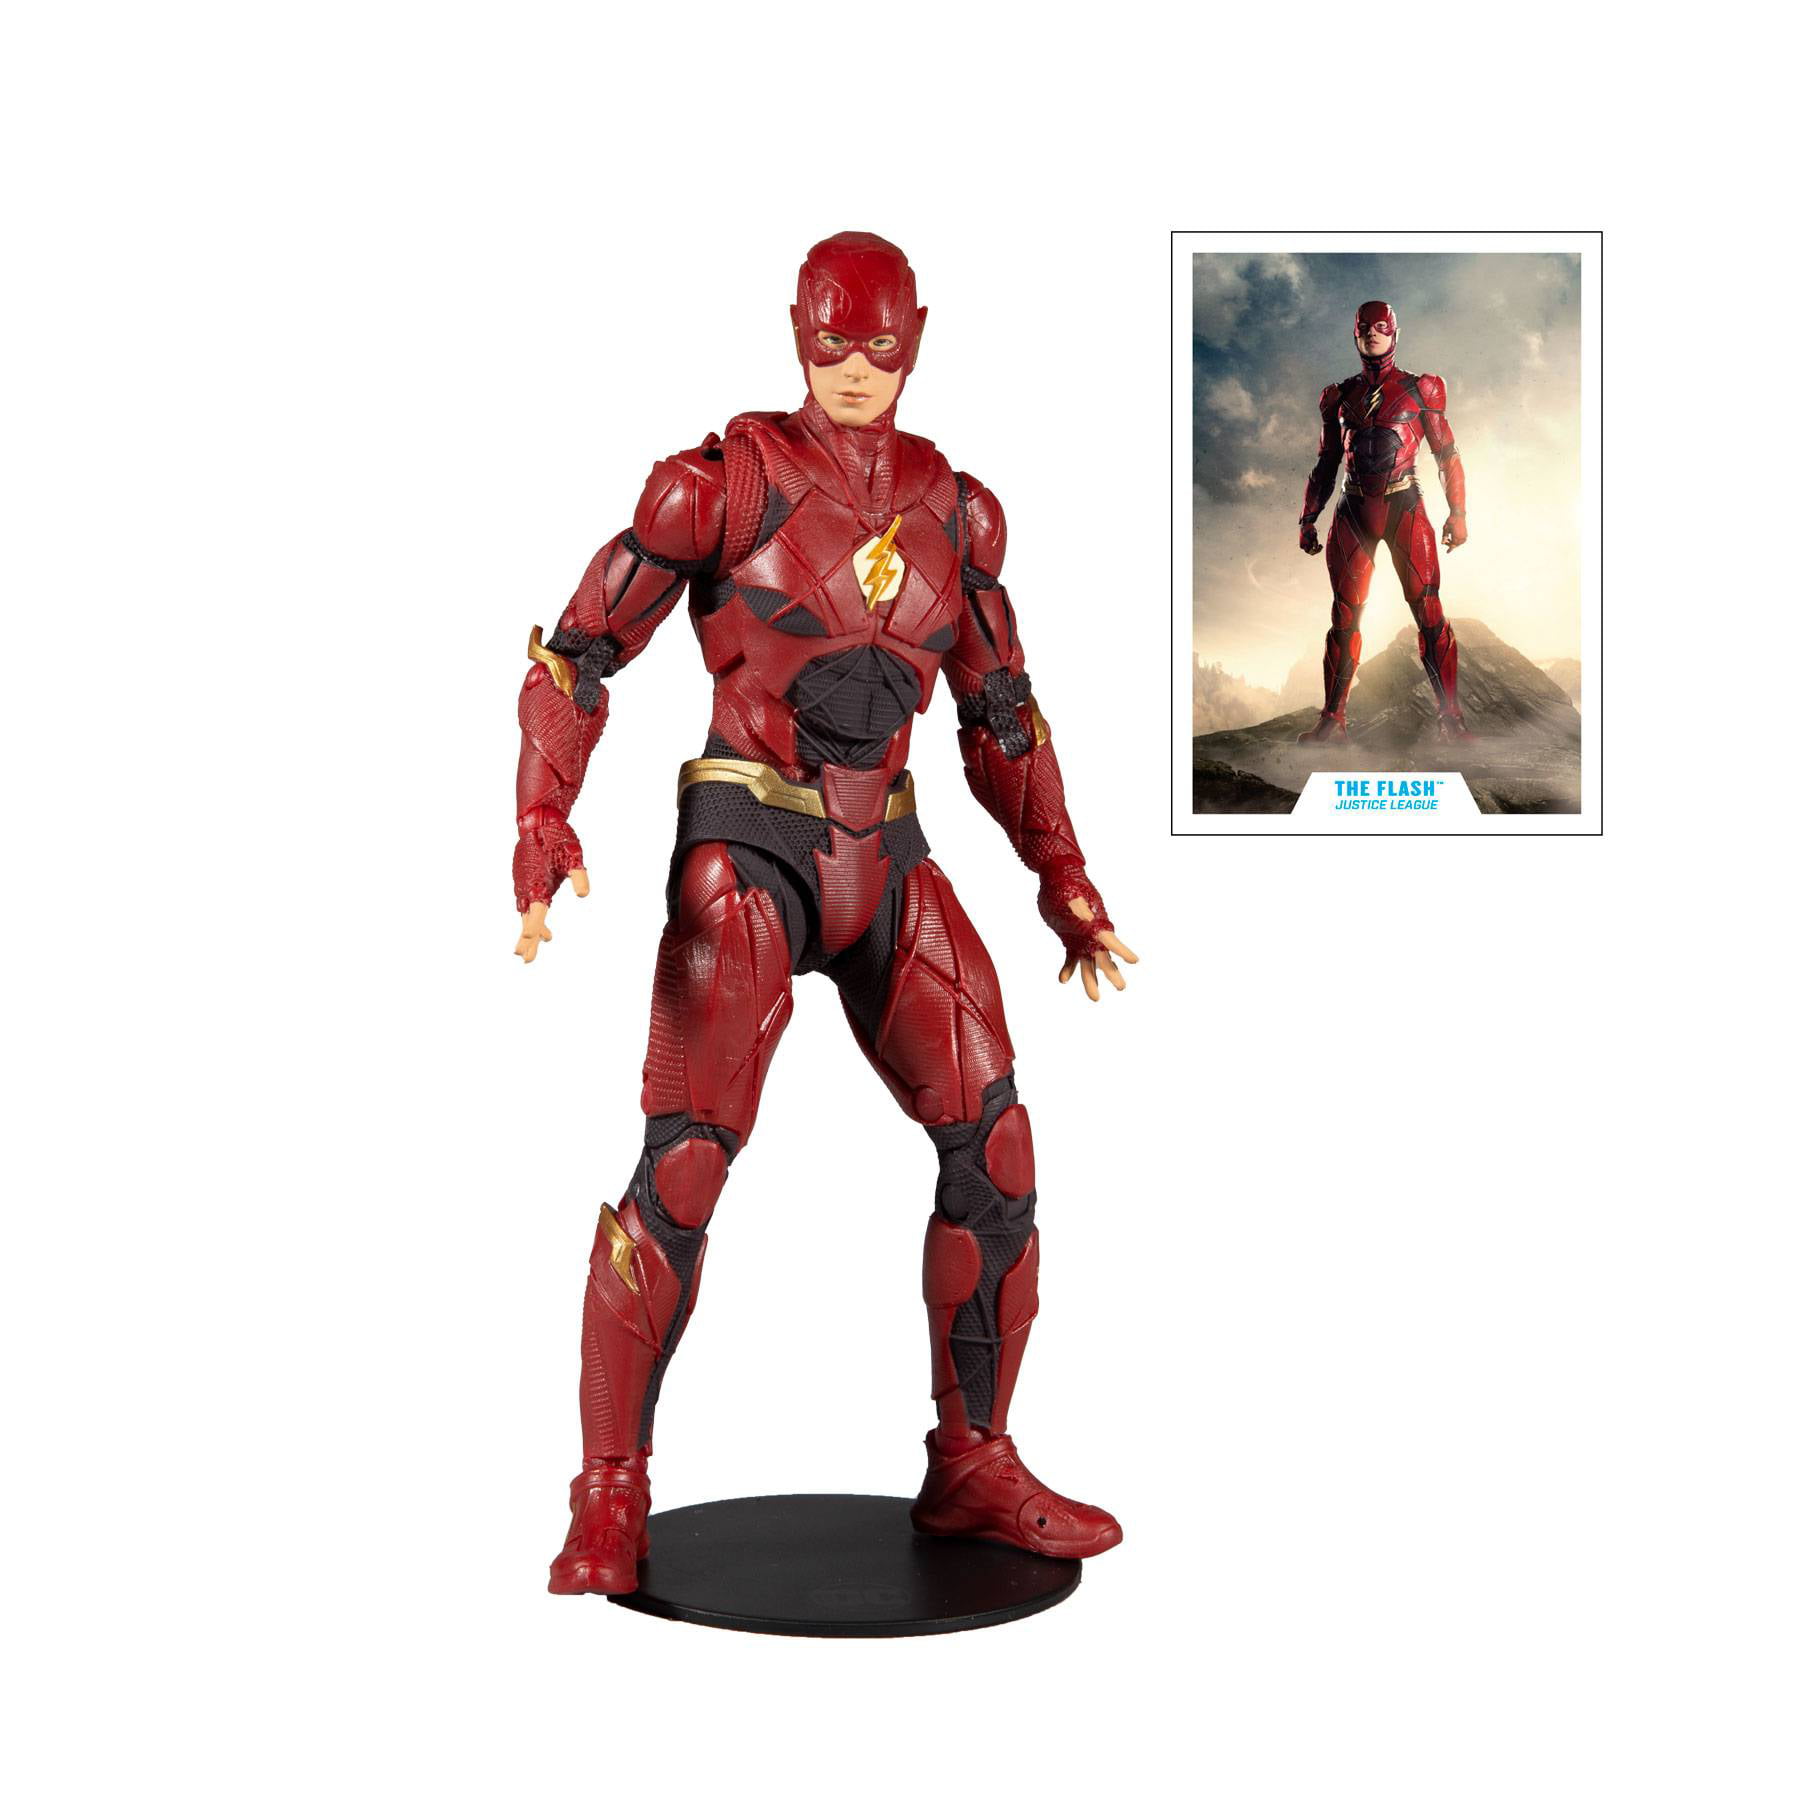 Justice League Unlimited Anti-amazo The Flash Action Figure Toy for sale online 